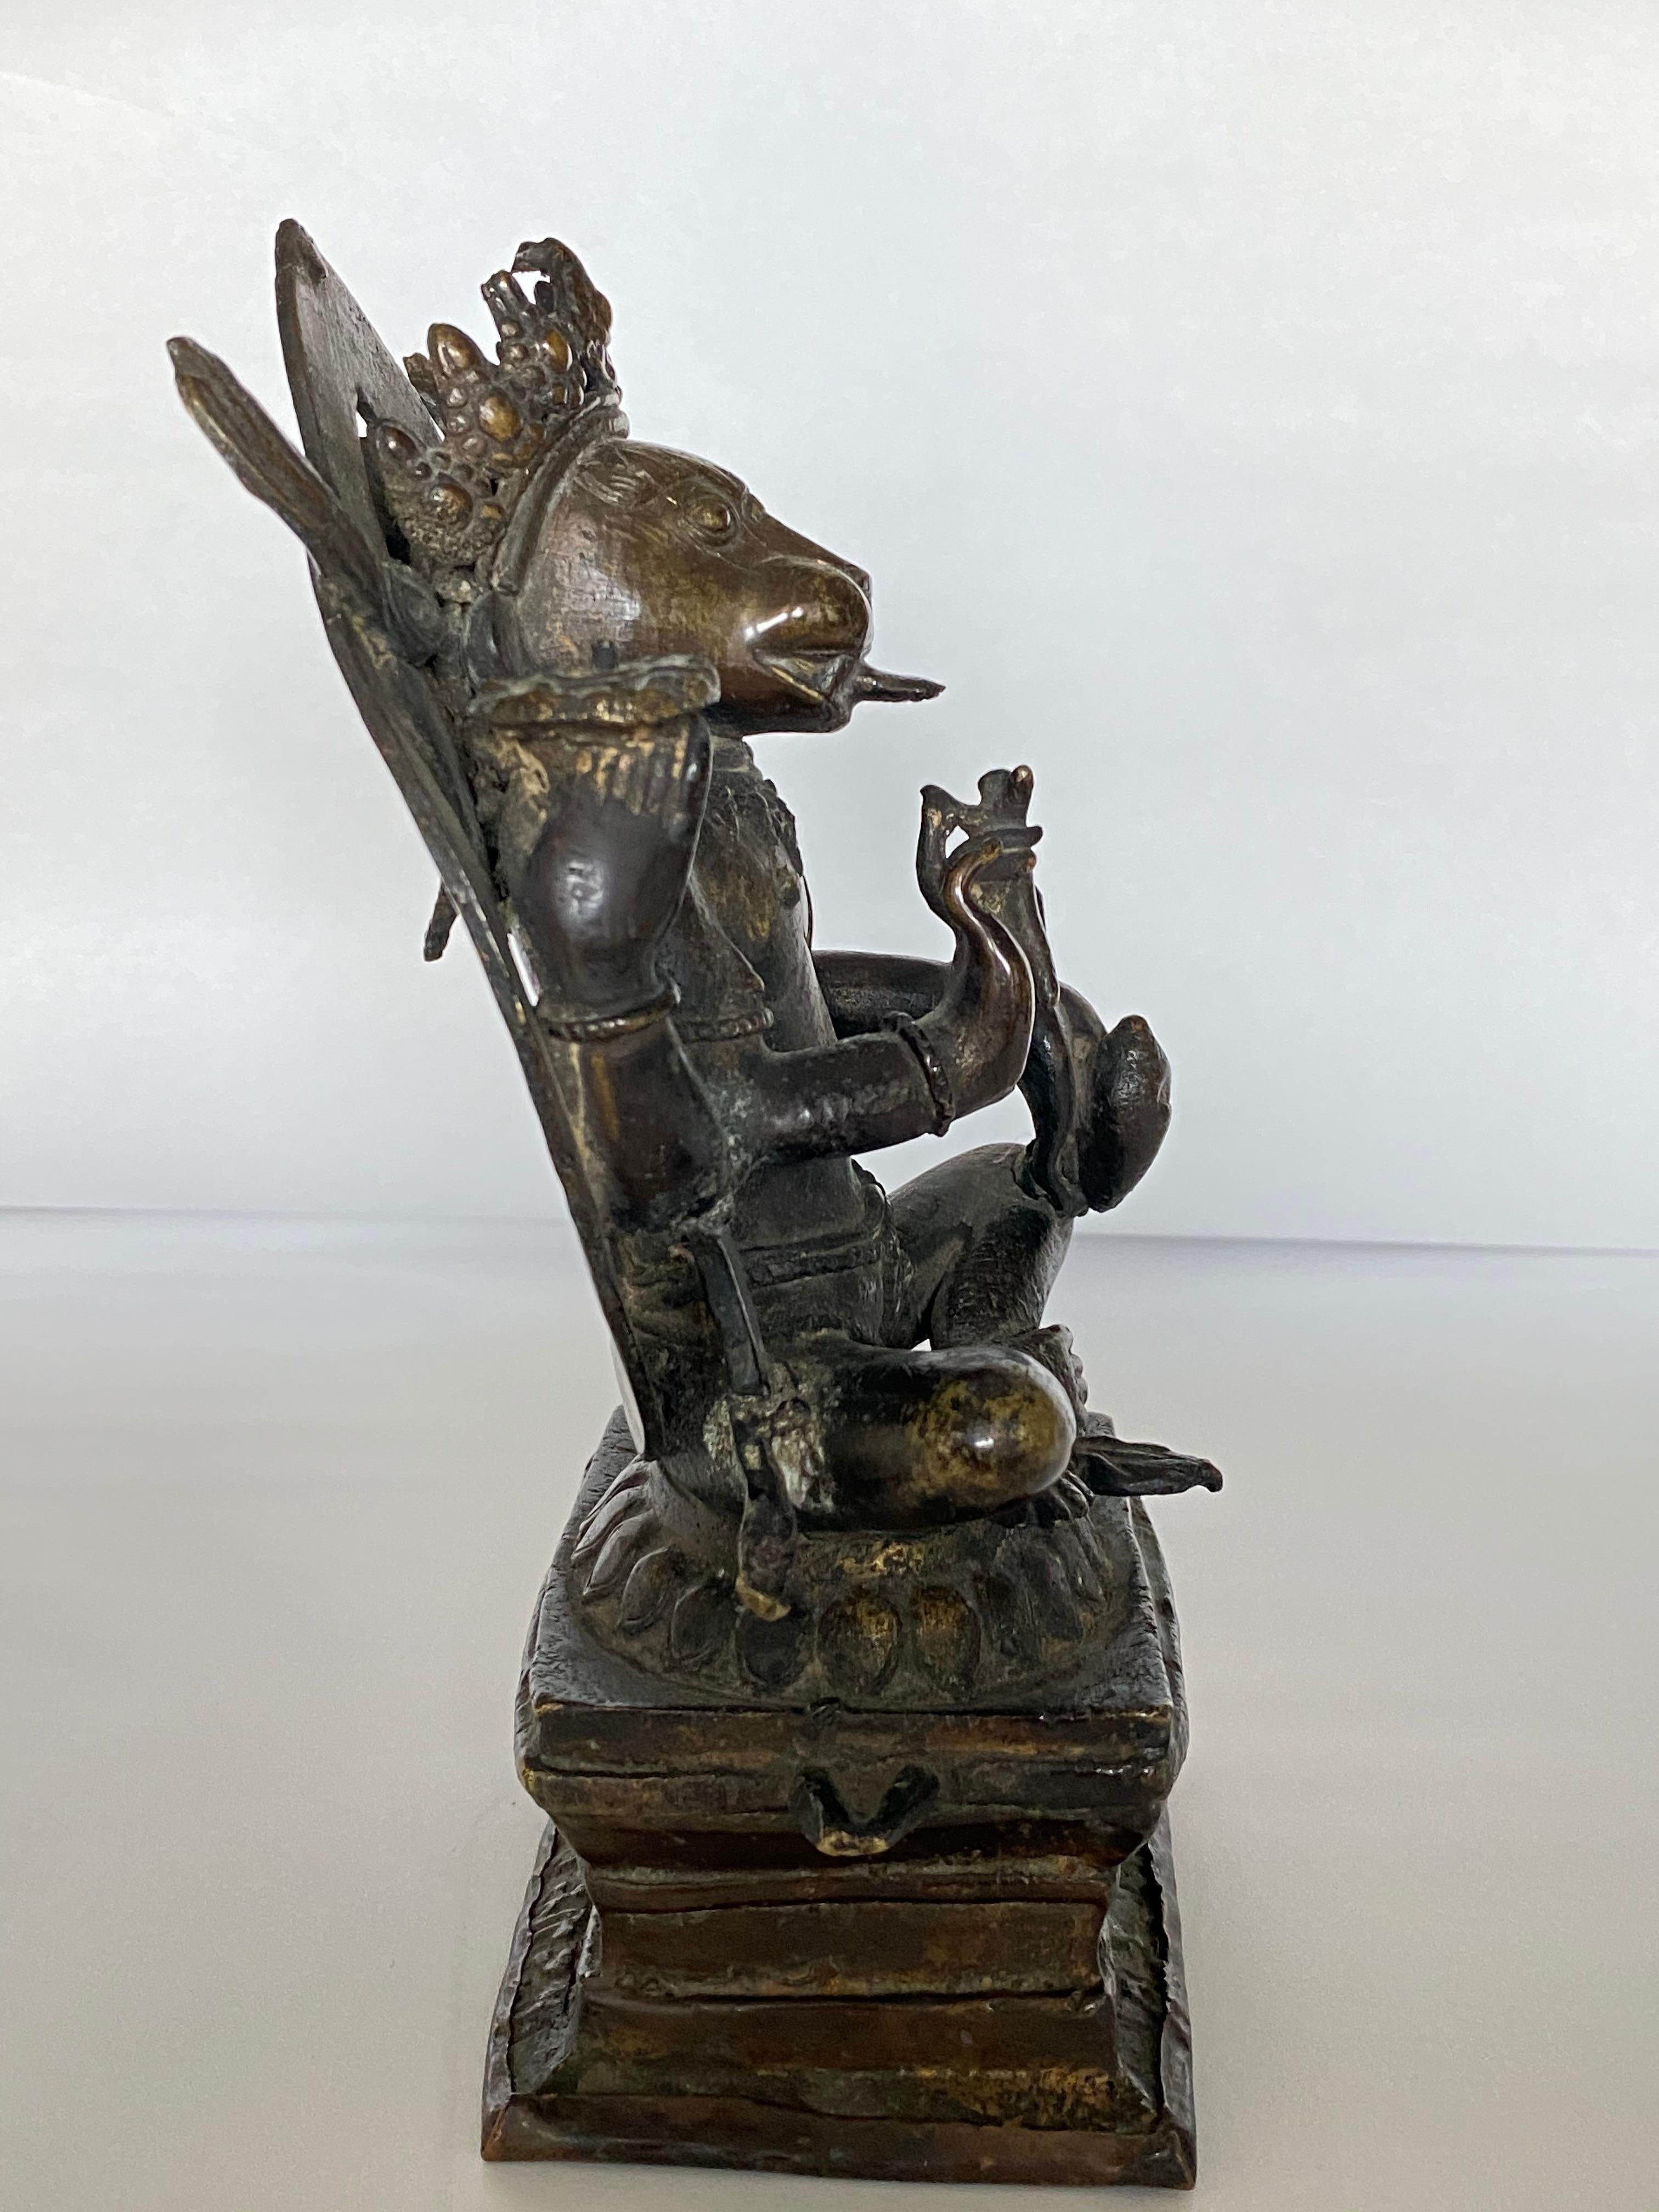 This beautifully patinated bronze figure of Yoga Narasimha, the fourth incarnation of Vishnu as a man-lion is from Kashmir in North India. Nara means man and simha means lion. He is seated on a lotus.

Compare to an earlier example recently sold